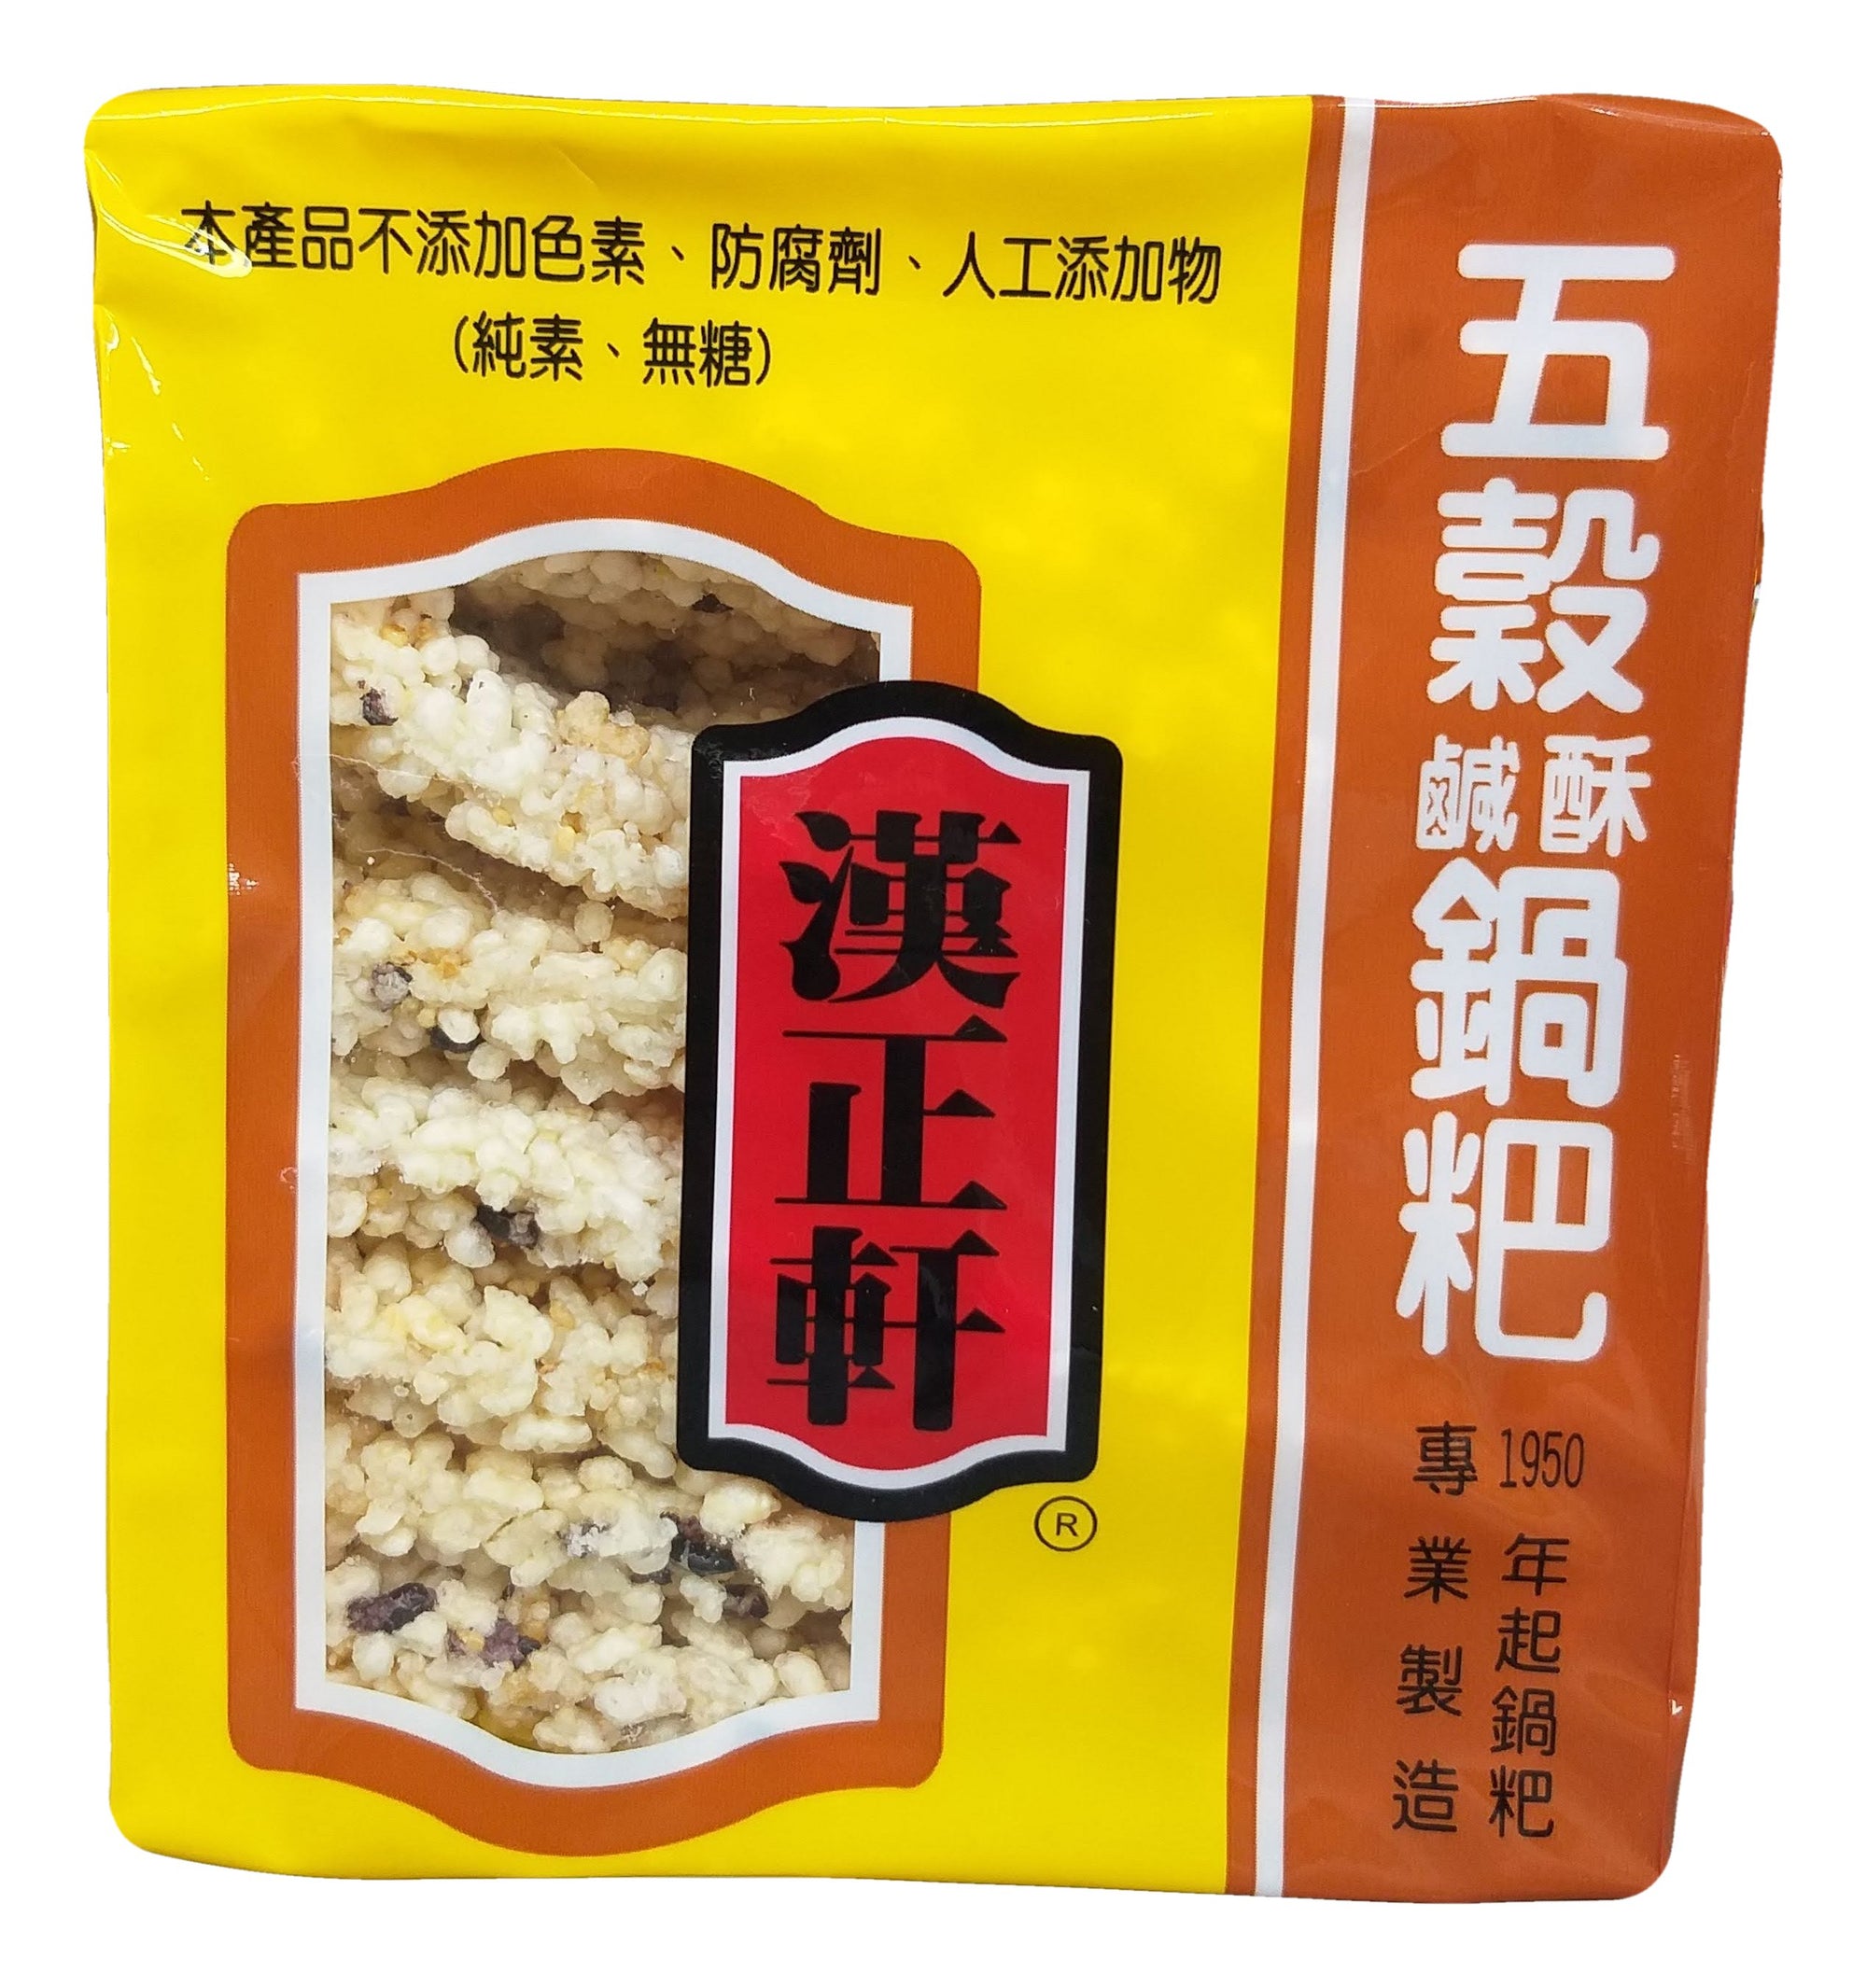 Hahn Shyuan - Rice Cake, 7 Ounces (pack of 1)